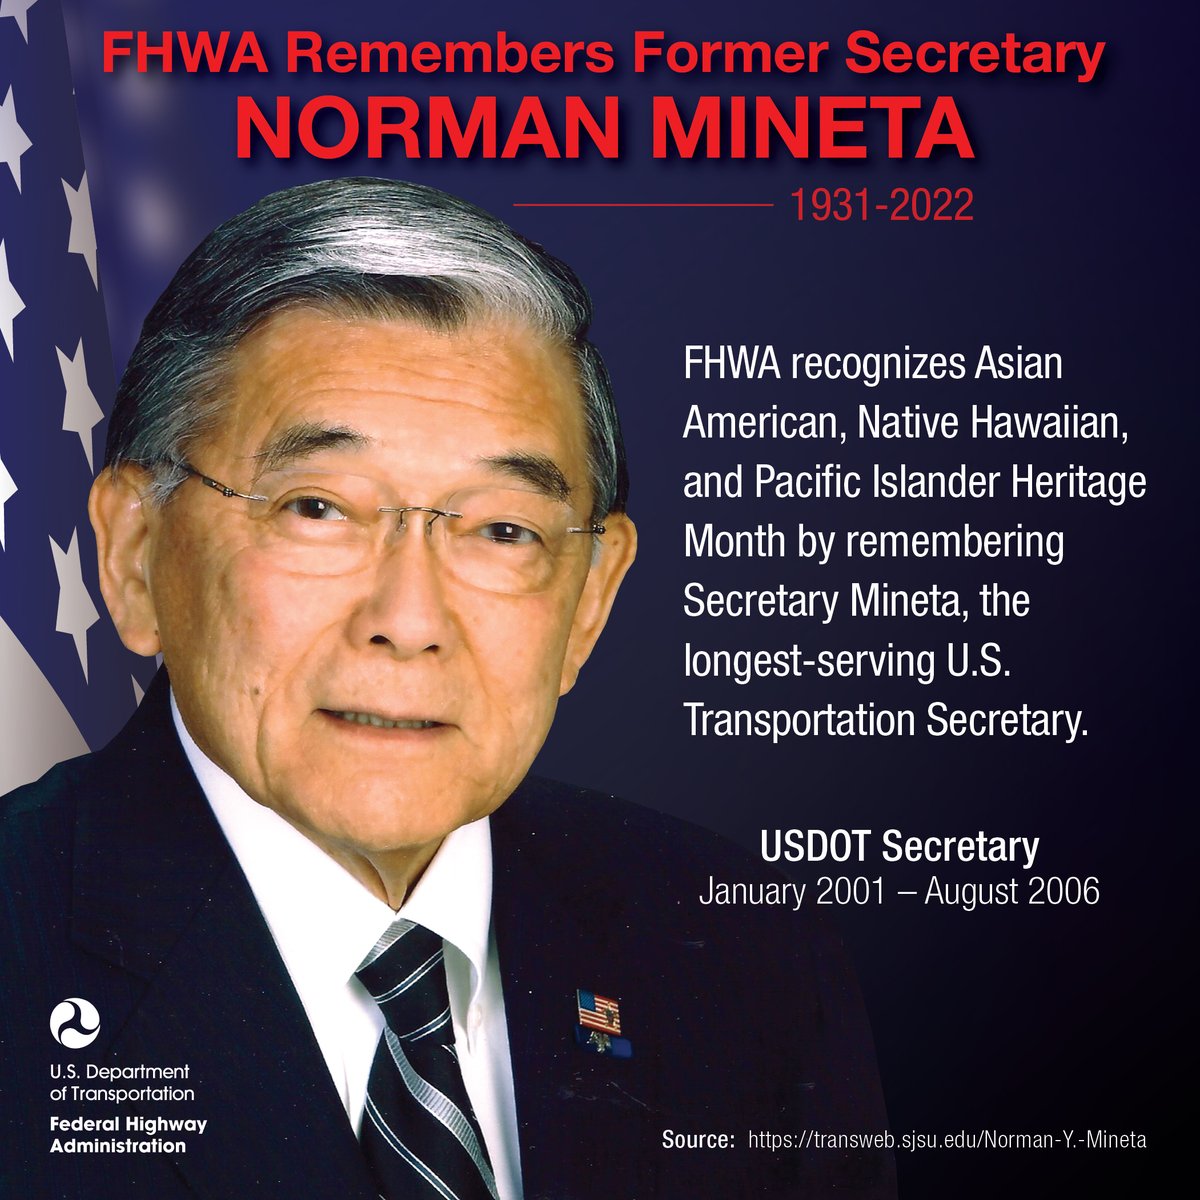 FHWA recognizes Asian American, Native Hawaiian, and Pacific Islander Heritage Month by remembering Secretary Norman Mineta, the longest-serving U.S. Transportation Secretary from 2001-2006. #APPIHeritageMonth